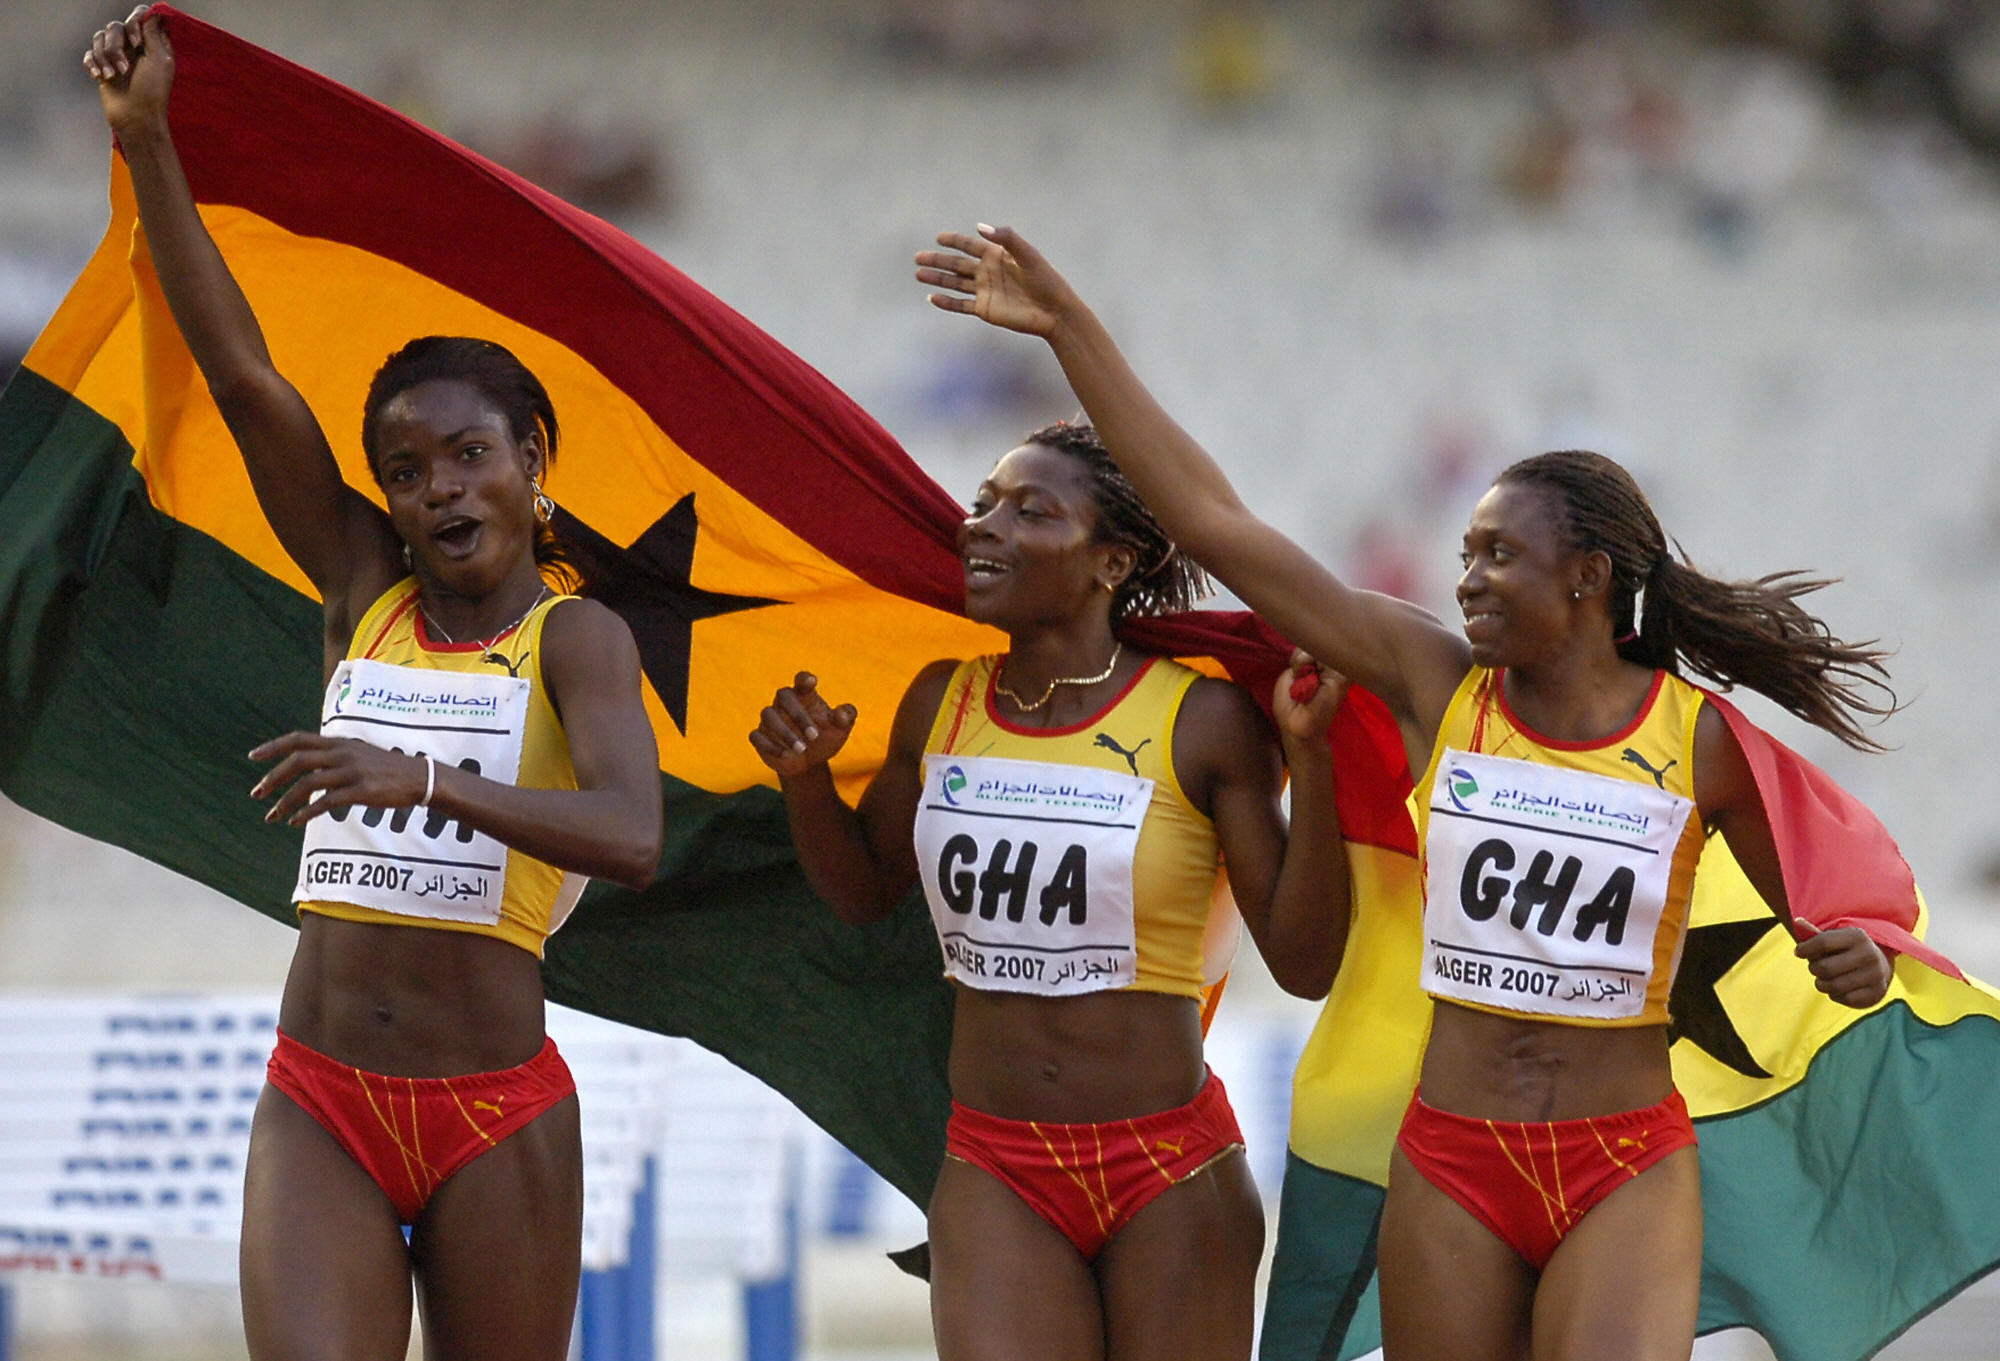 Accra 2023 African Games Organising Committee planning to send athletes on overseas training camps